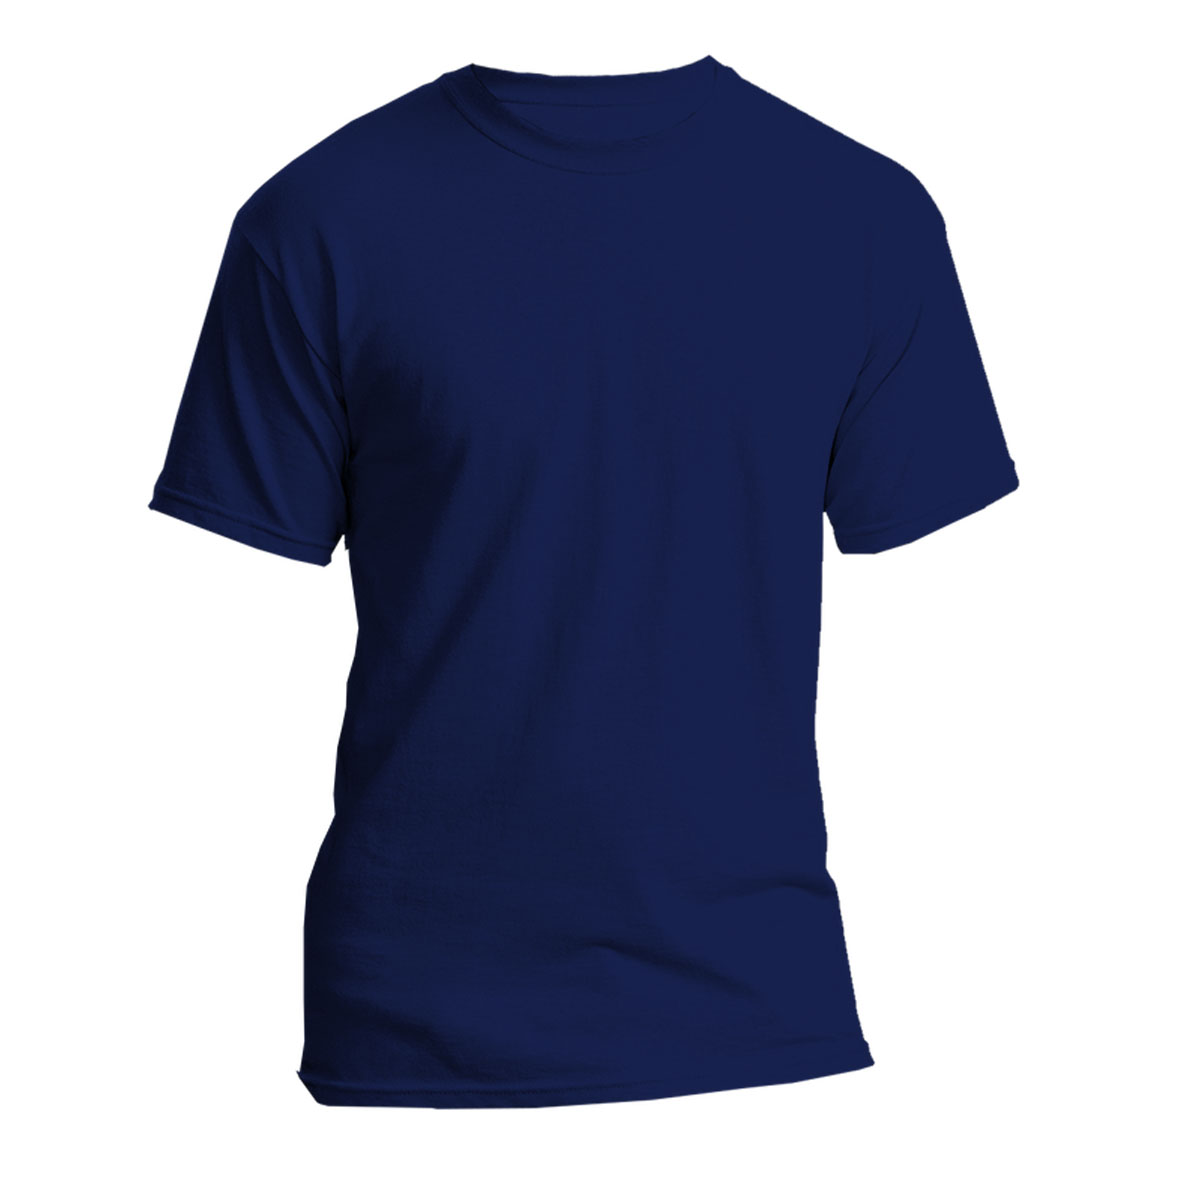 Navy Blue Round Neck Tshirt - Branding & Printing Solutions Company in ...